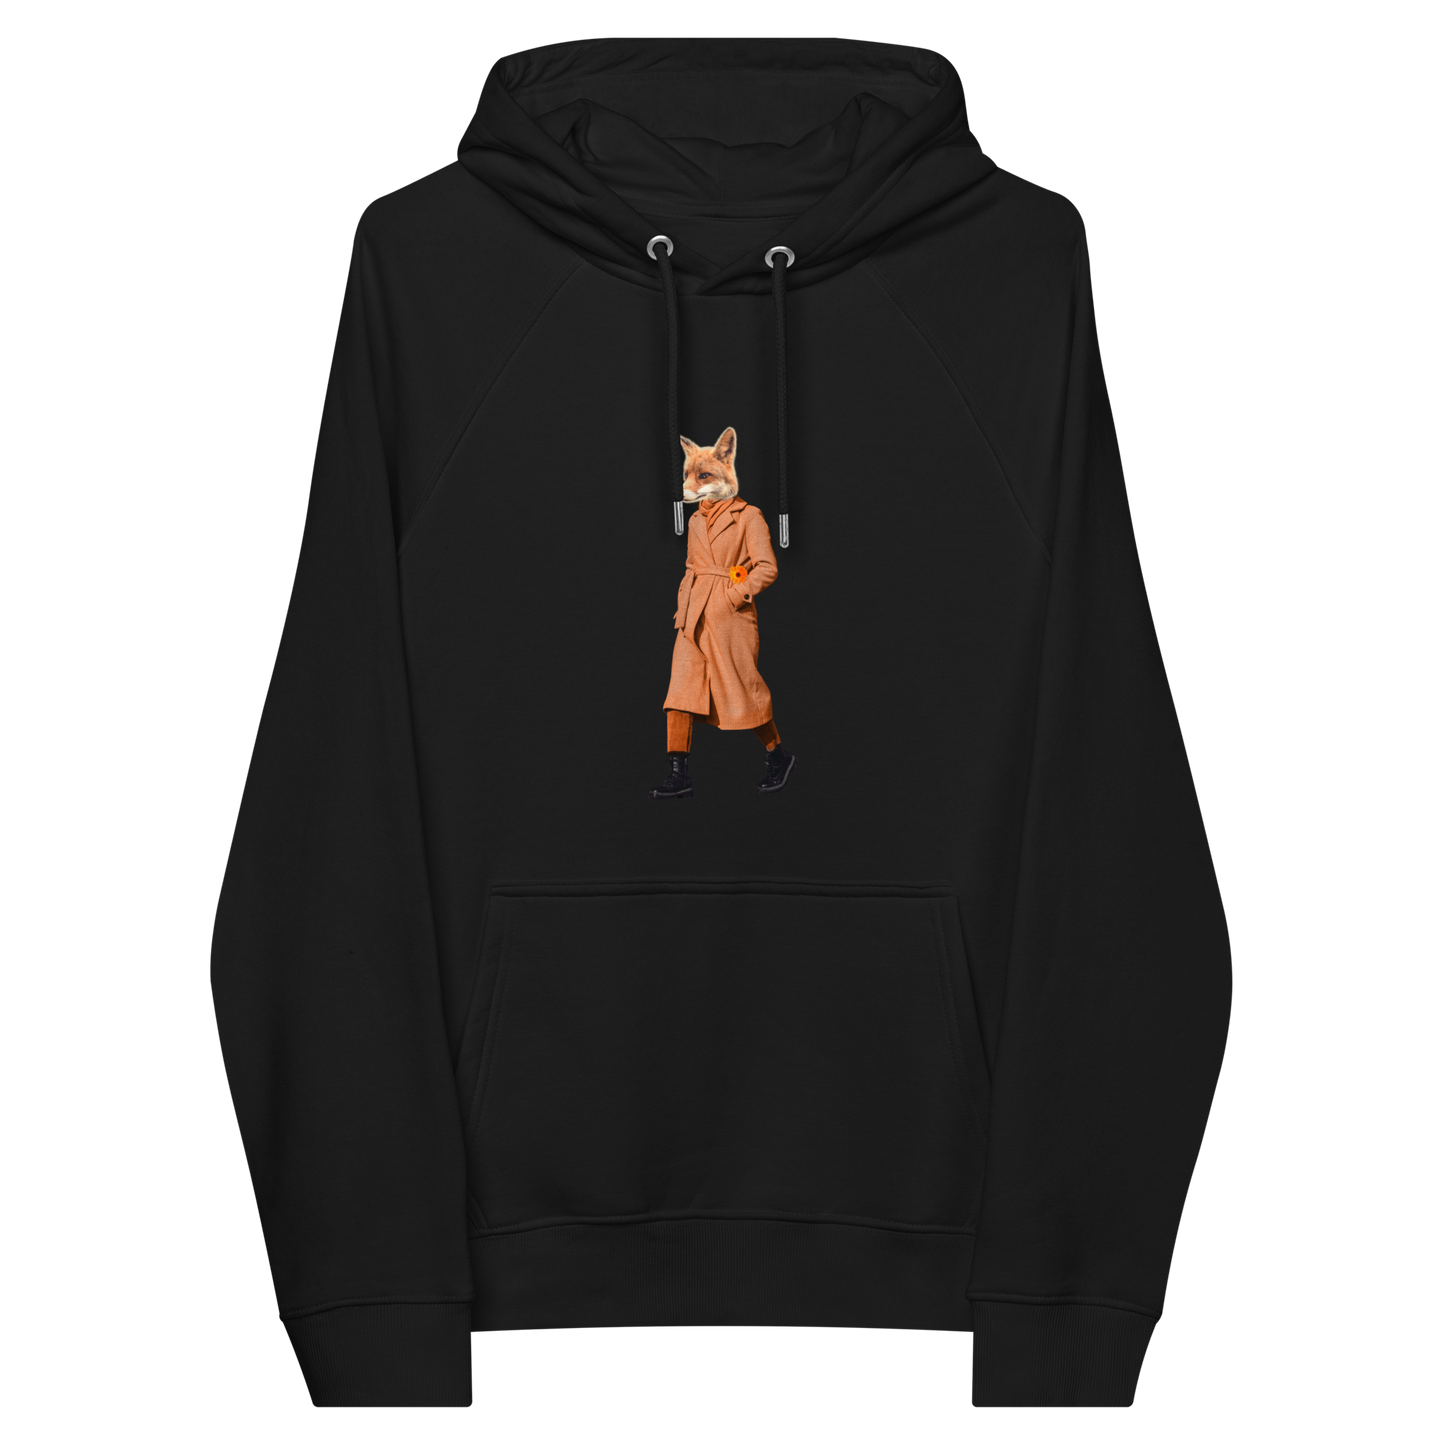 Black Anthropomorphic Fox Raglan Hoodie featuring a sly Anthropomorphic Fox in a Trench Coat graphic on the chest - Funny Graphic Fox Hoodies - Boozy Fox